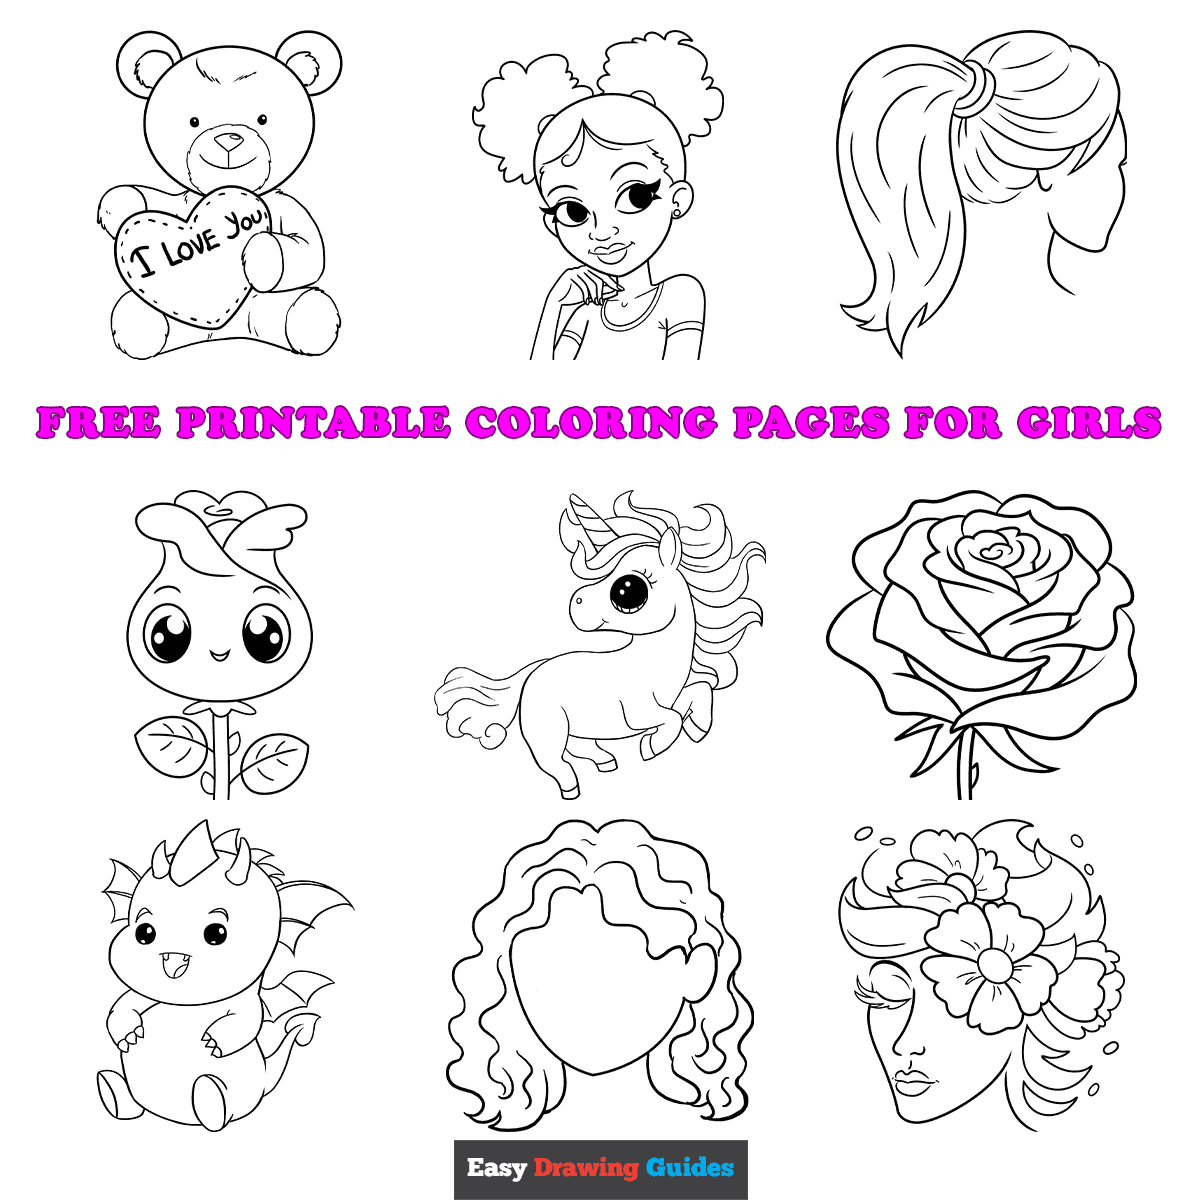 Free printable coloring pages for girls